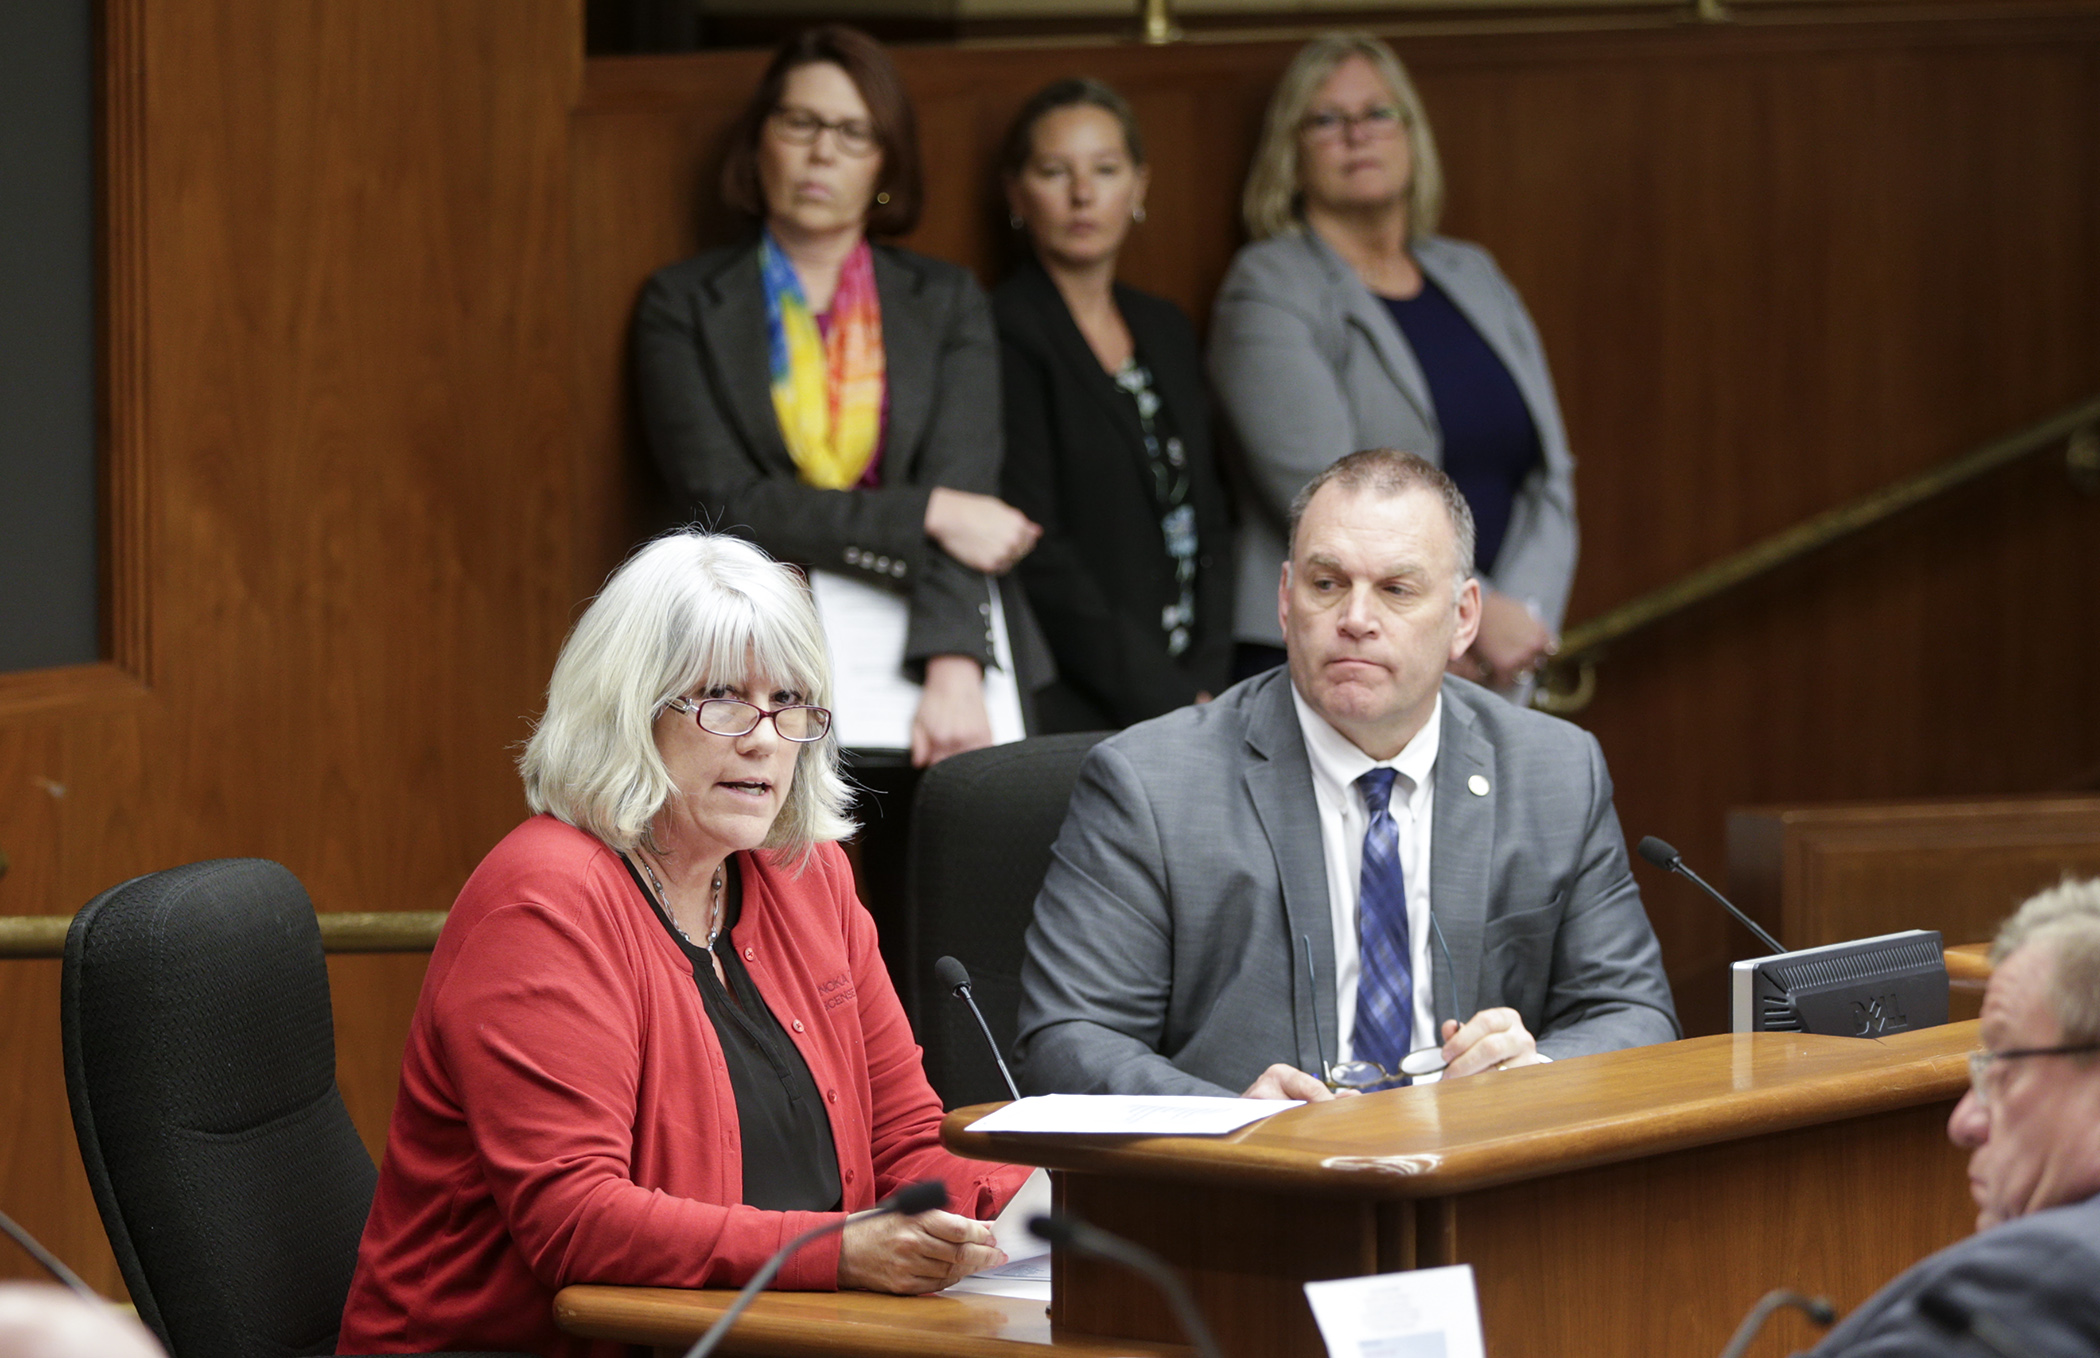 Anoka County Deputy Registrar Paula Anderson testifies in favor of HF2835, sponsored by Rep. Dave Baker, right, that would provide reimbursement to deputy registrars for expenses due to problems with the rollout of the MNLARS system. Photo by Paul Battaglia